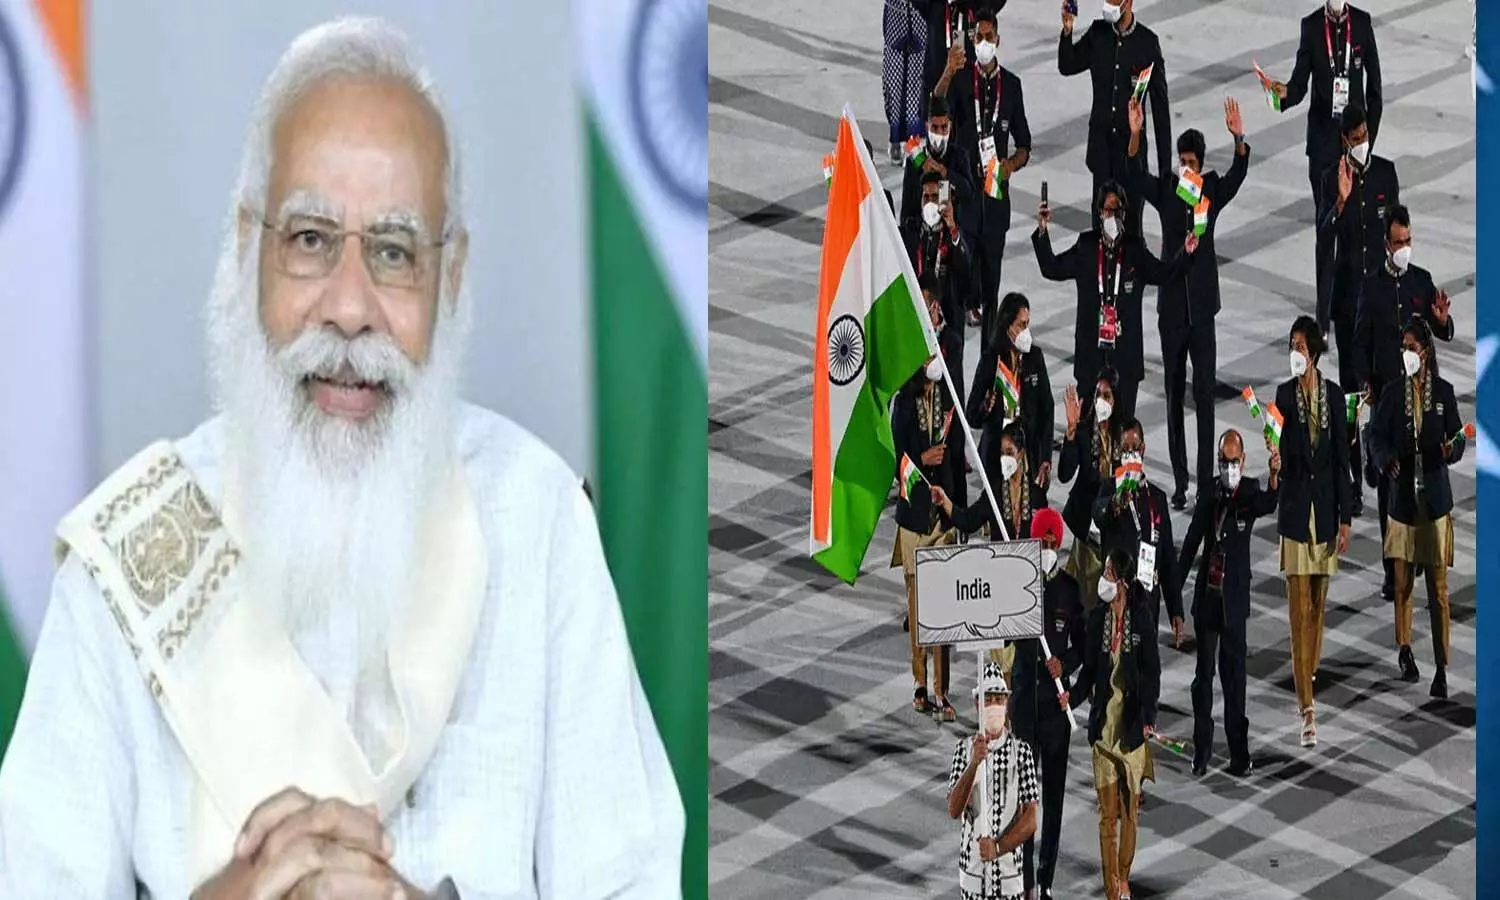 PM Modi will invite the Indian Olympic contingent to the Red Fort